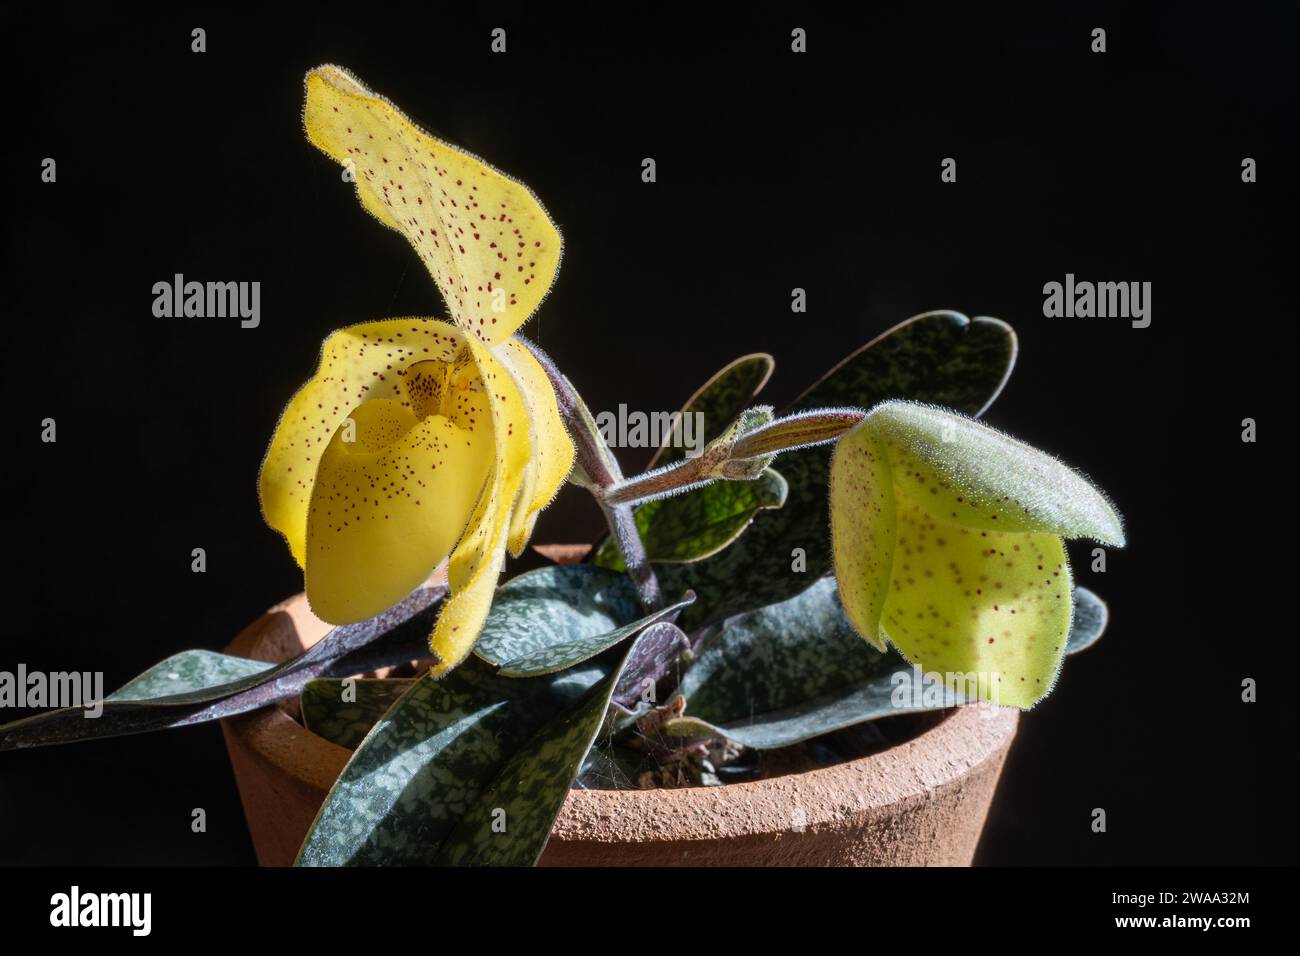 Closeup view of lady slipper orchid species paphiopedilum wenshanense aka conco-bellatulum with yellow flower and bud isolated on black background Stock Photo